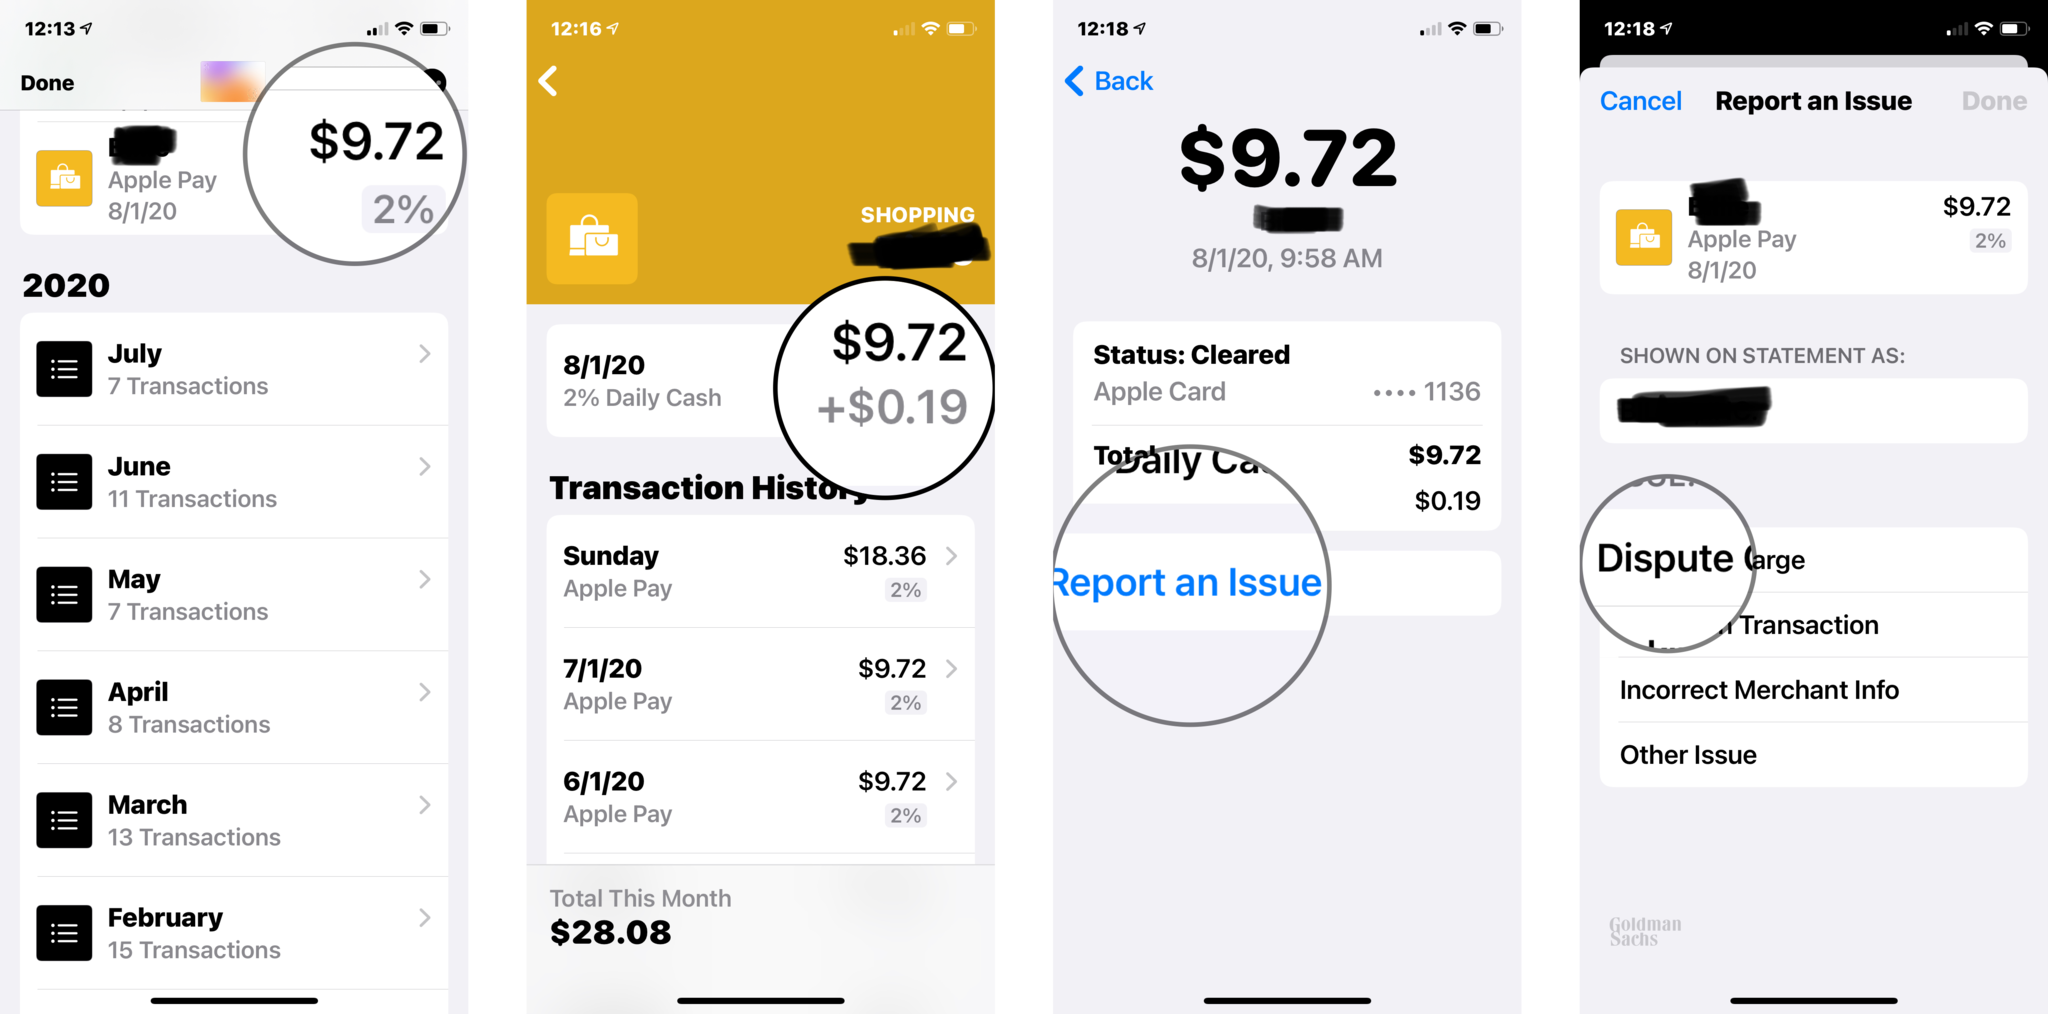 How To Dispute A Charge On Apple Card: Tap on any suspicious charges, tap the charge again, tap on Report an Issue, tap on Dispute Charge